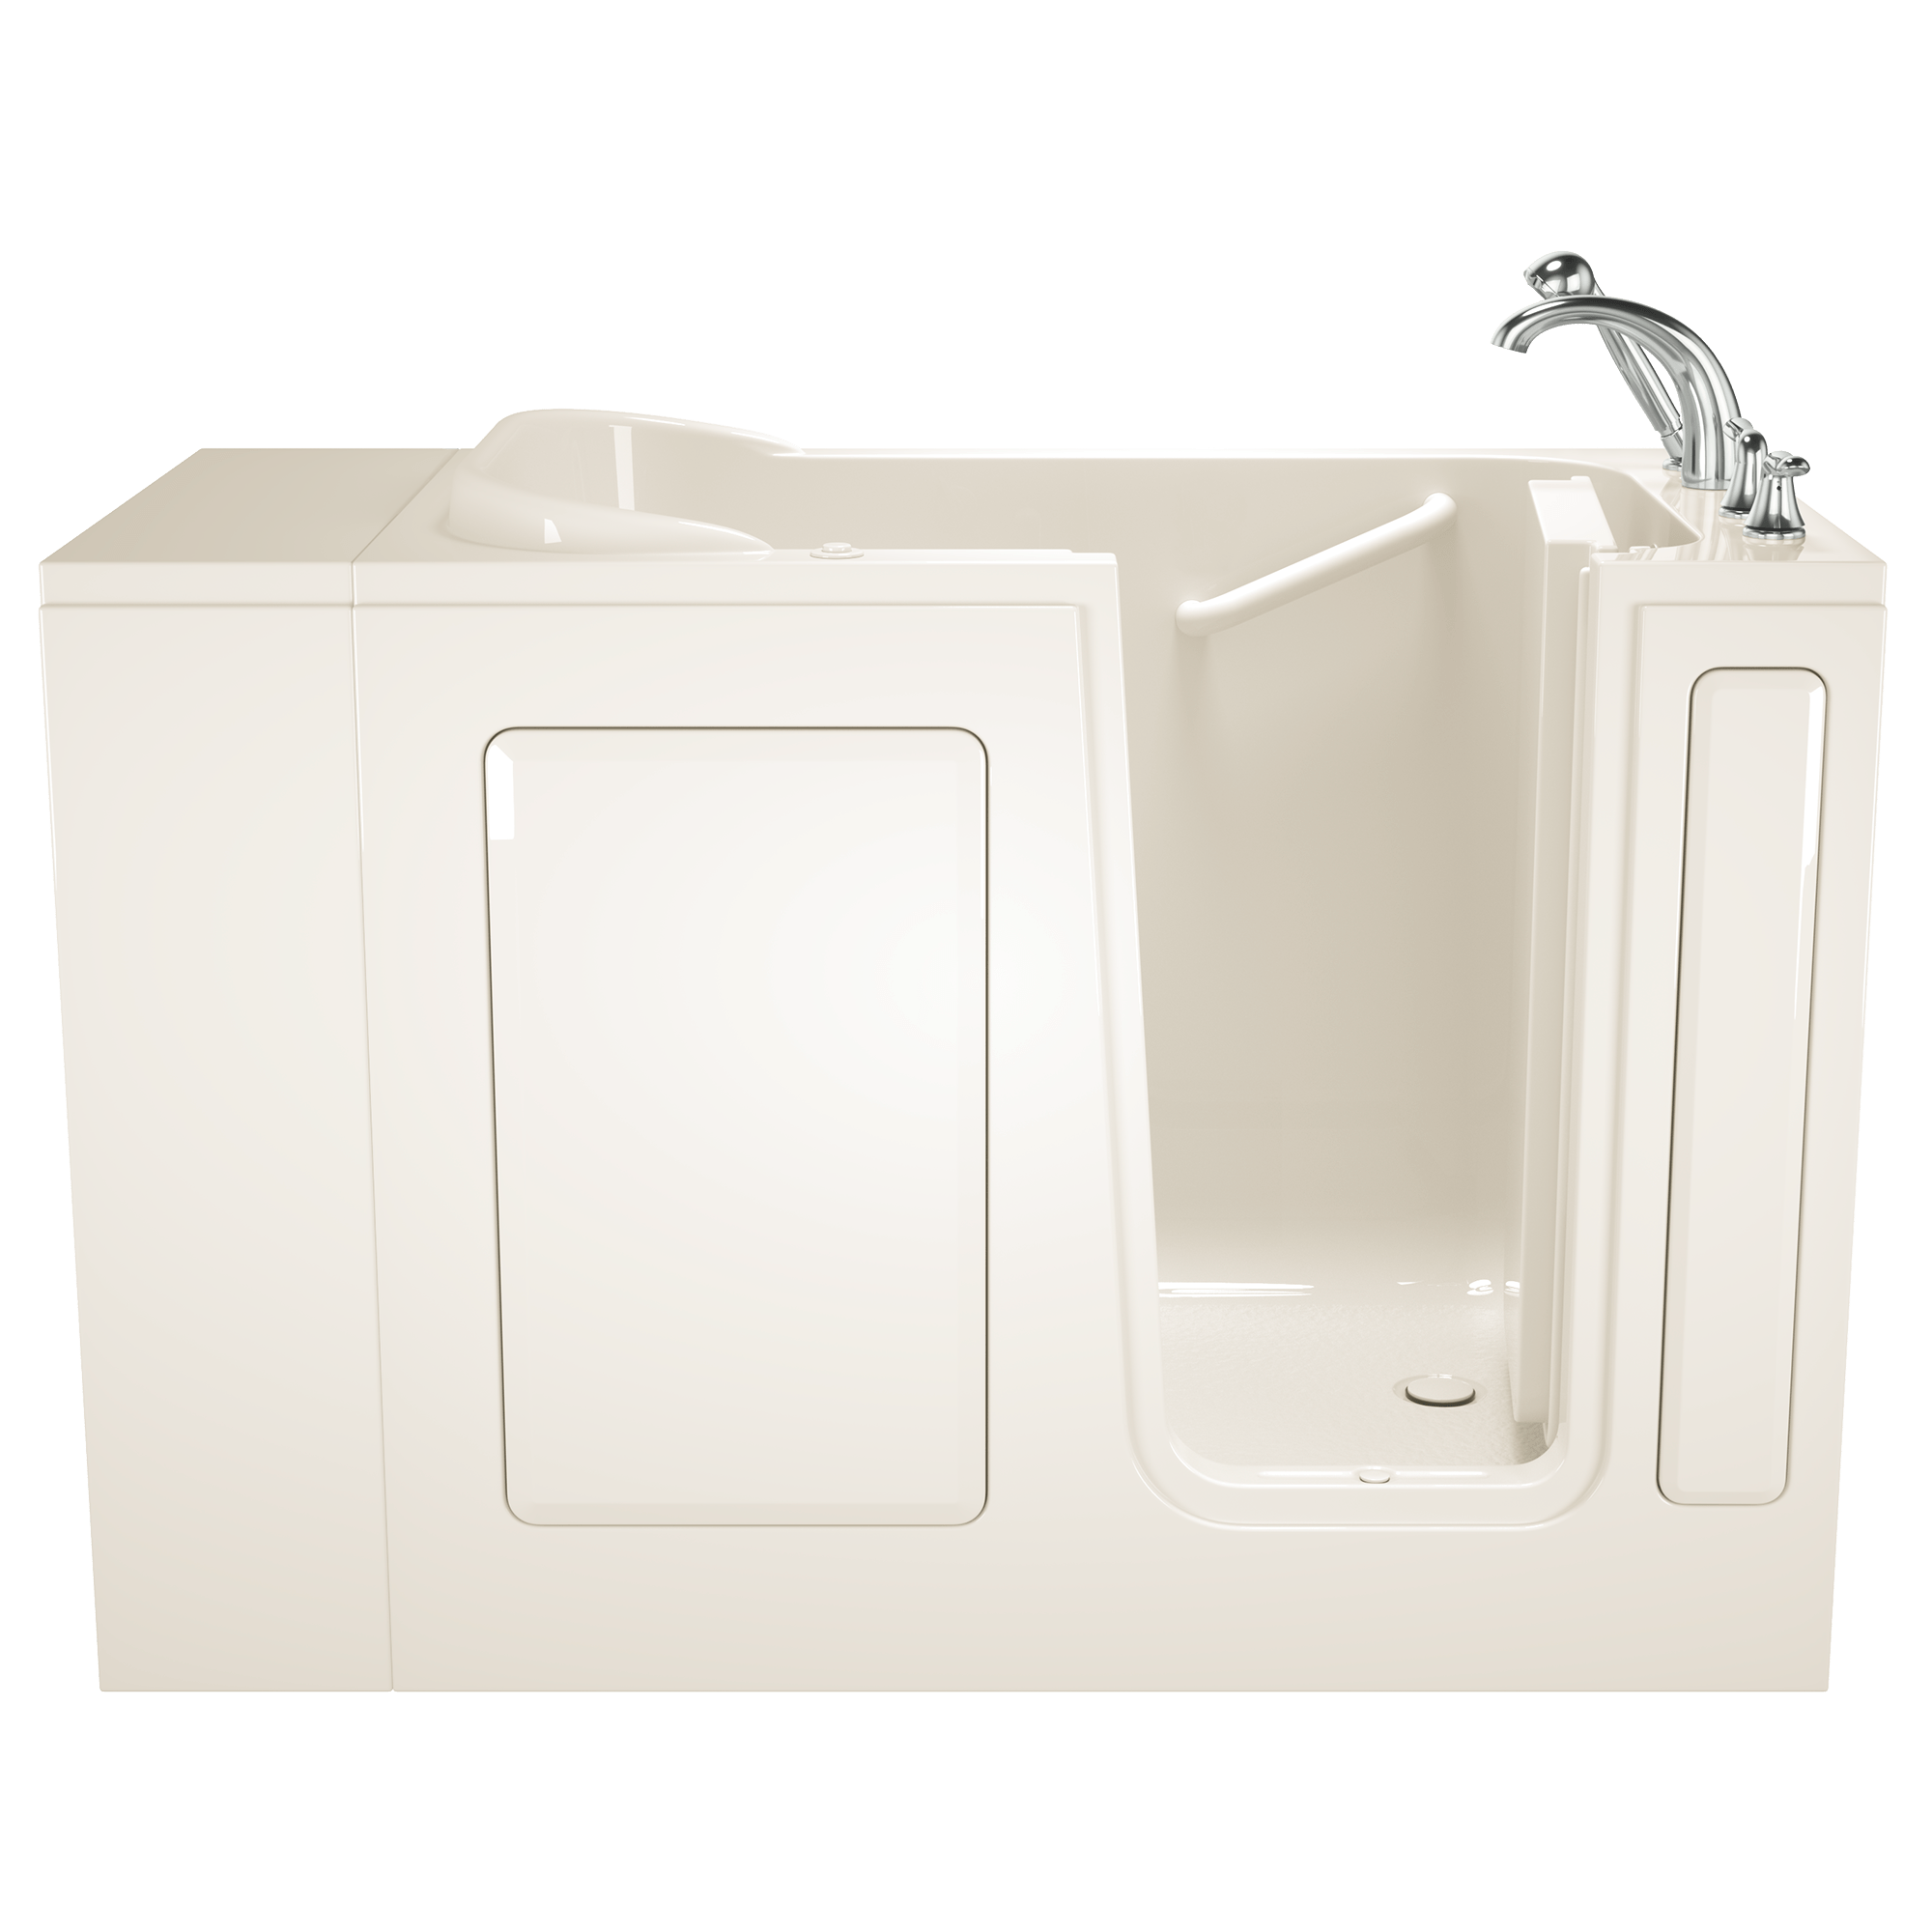 Gelcoat Entry Series 48 x 28 Inch Walk In Tub With Air Spa System - Right Hand Drain With Faucet ST BISCUIT